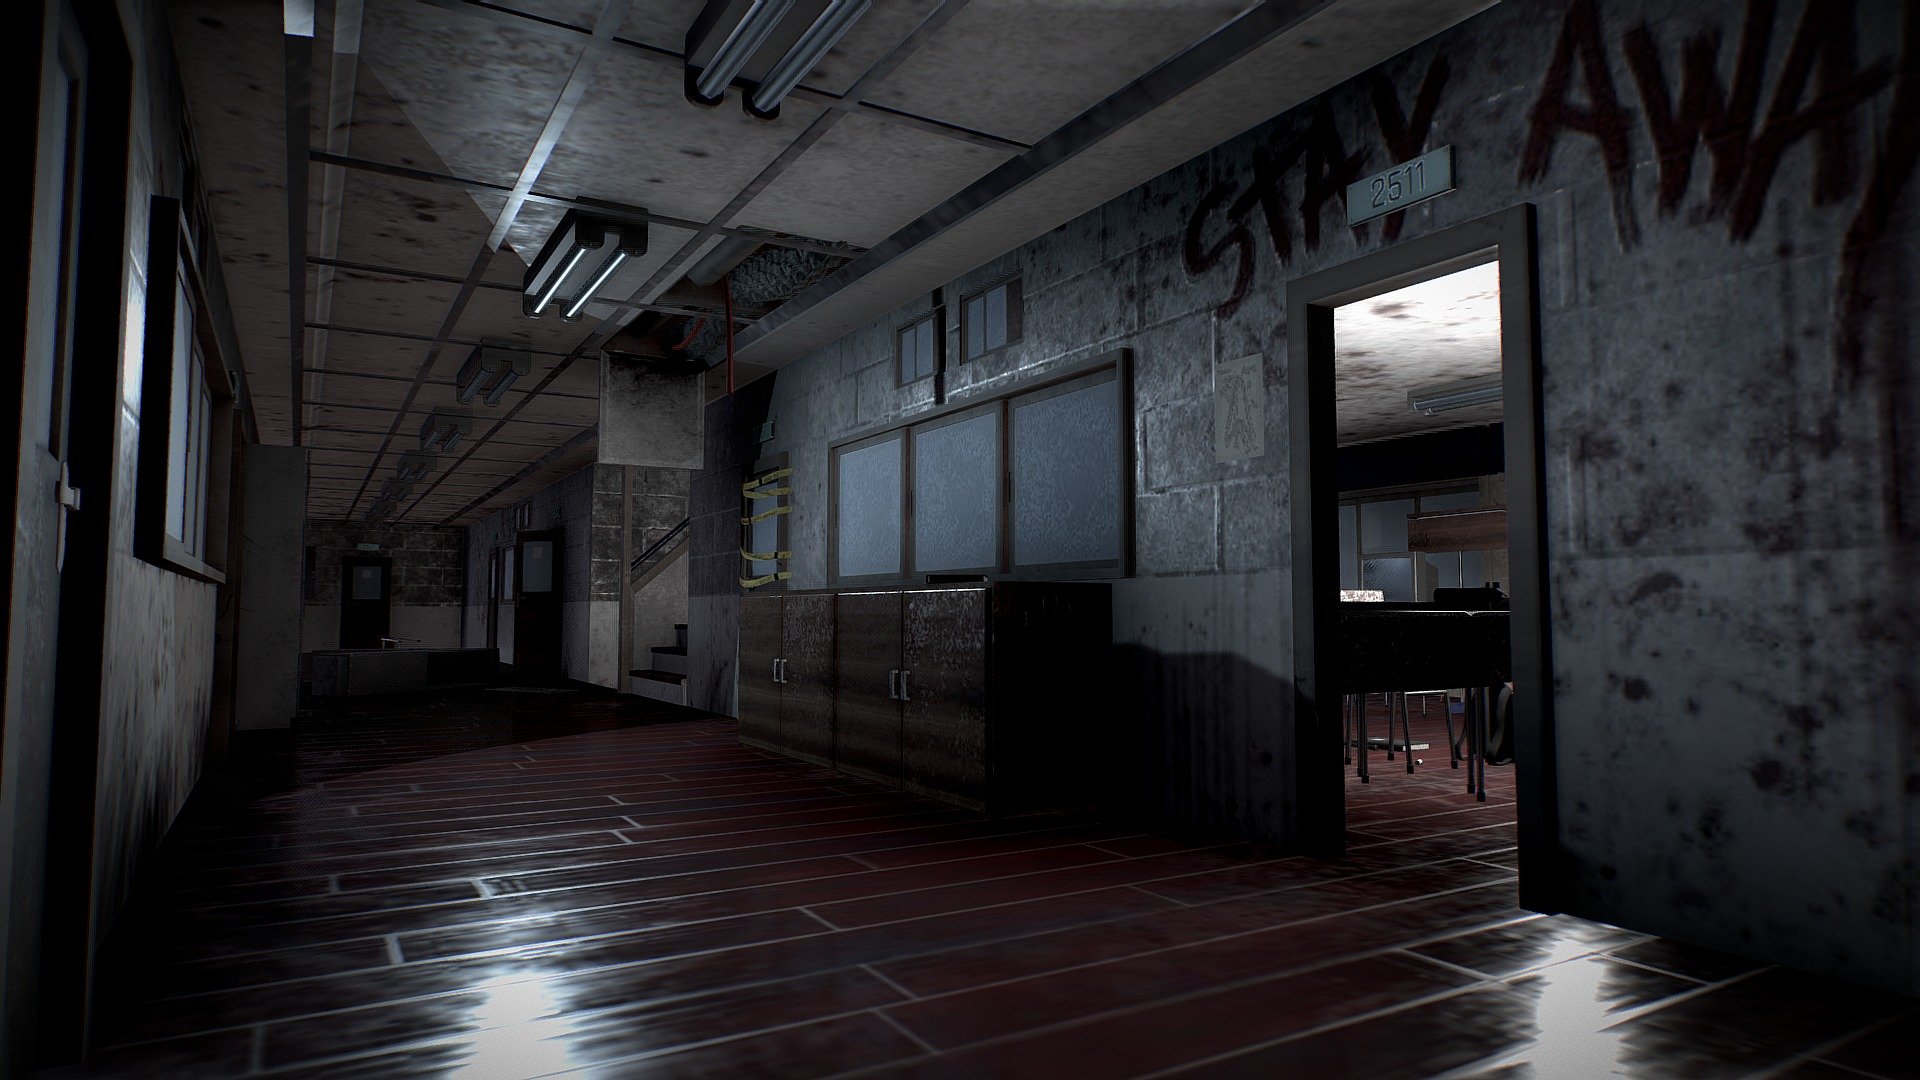 3D model I made based on one of the enviroment concept I design early this year. You can see it here: https://www.artstation.com/artwork/mDqlQa

I hope you like it! - Creepy school hallway (WIP) - 3D model by altiegg 3d model